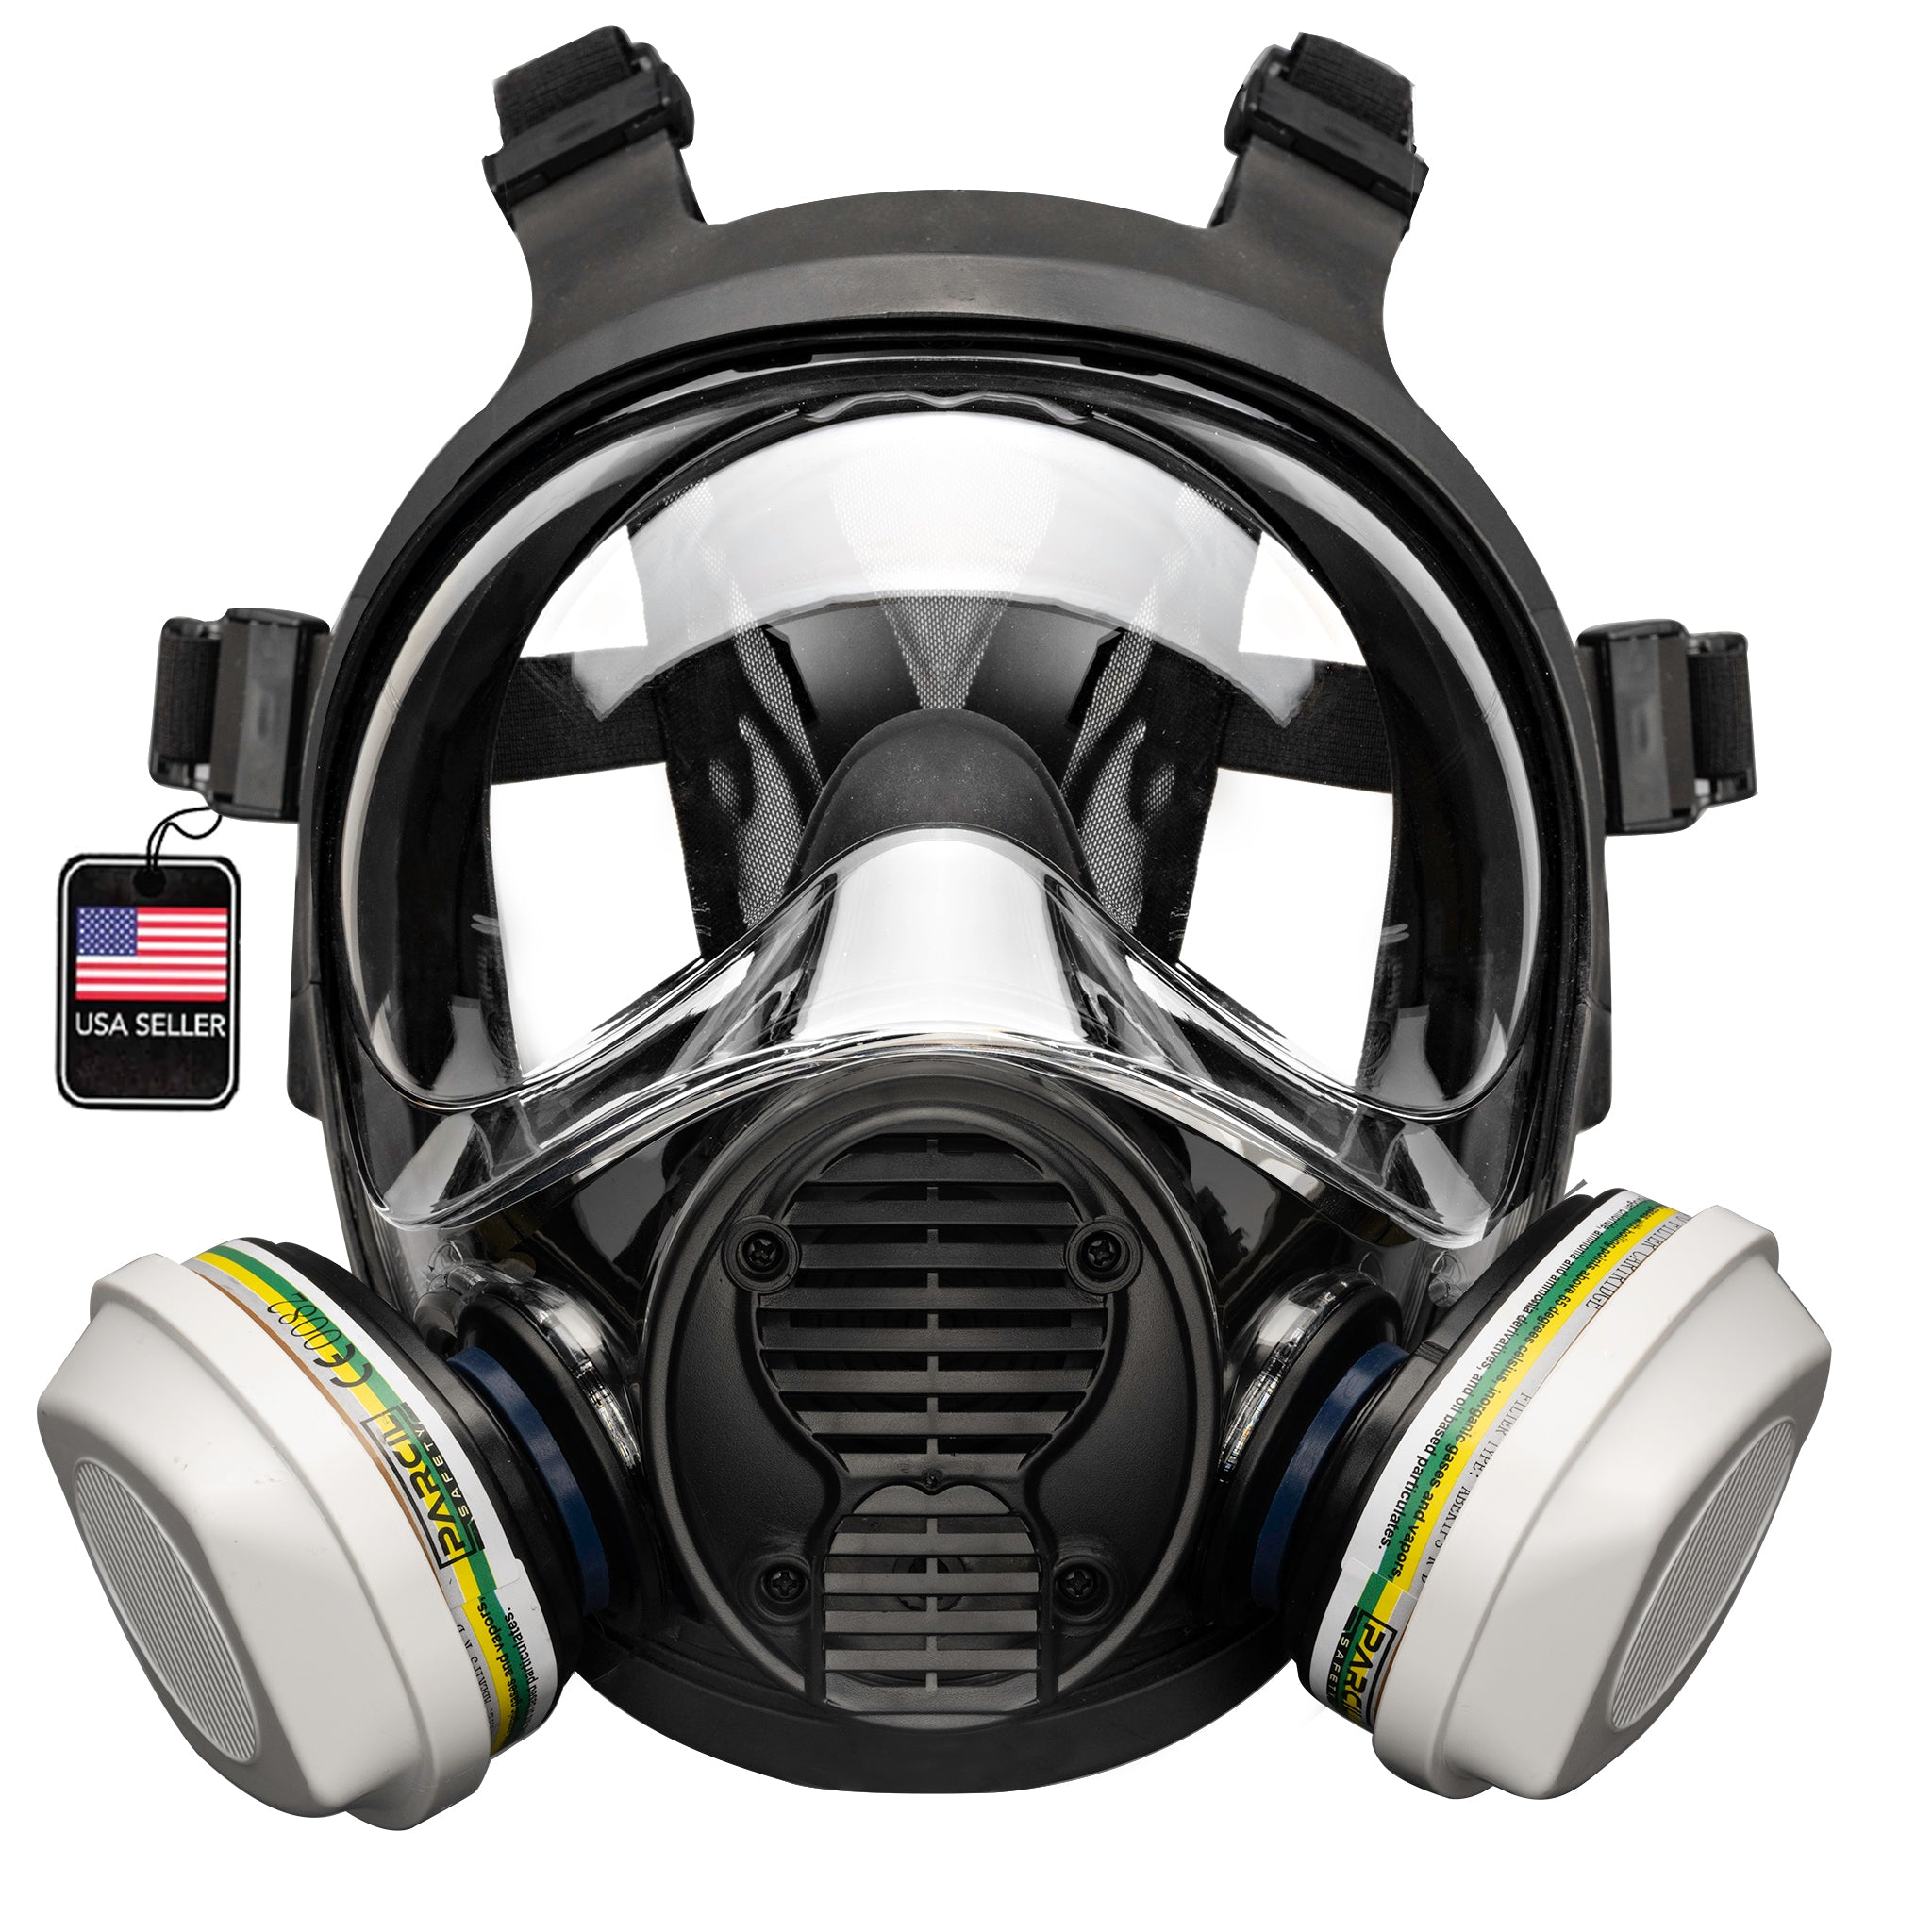 NB-100B Industrial Respirator with Bayonet Style Filter Ports